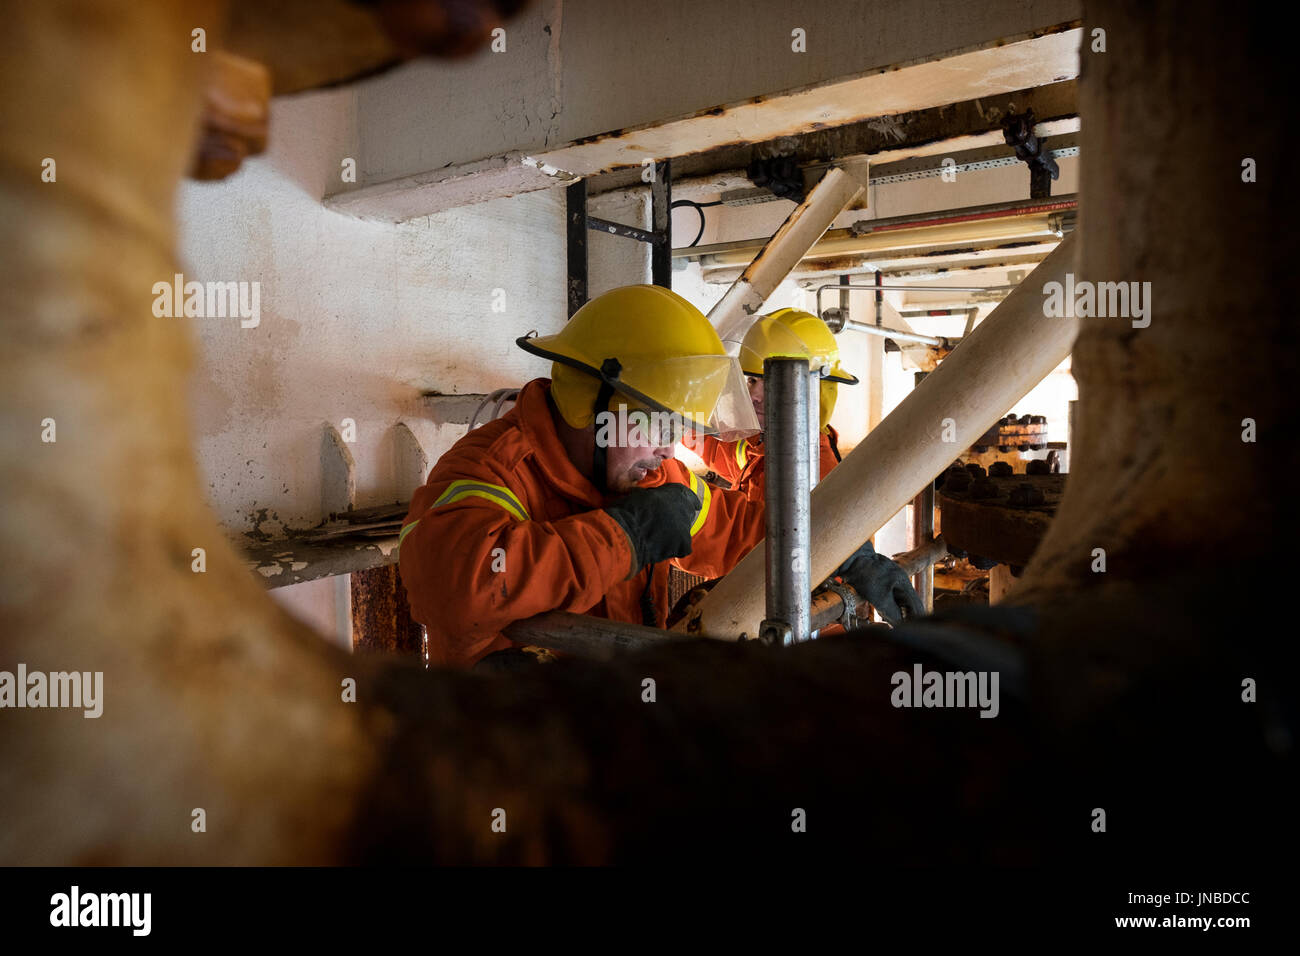 A member of the fire team on a north sea oil and as rig, using his radio, as part a emergency response exercise. credit: LEE RAMSDEN / ALAMY Stock Photo